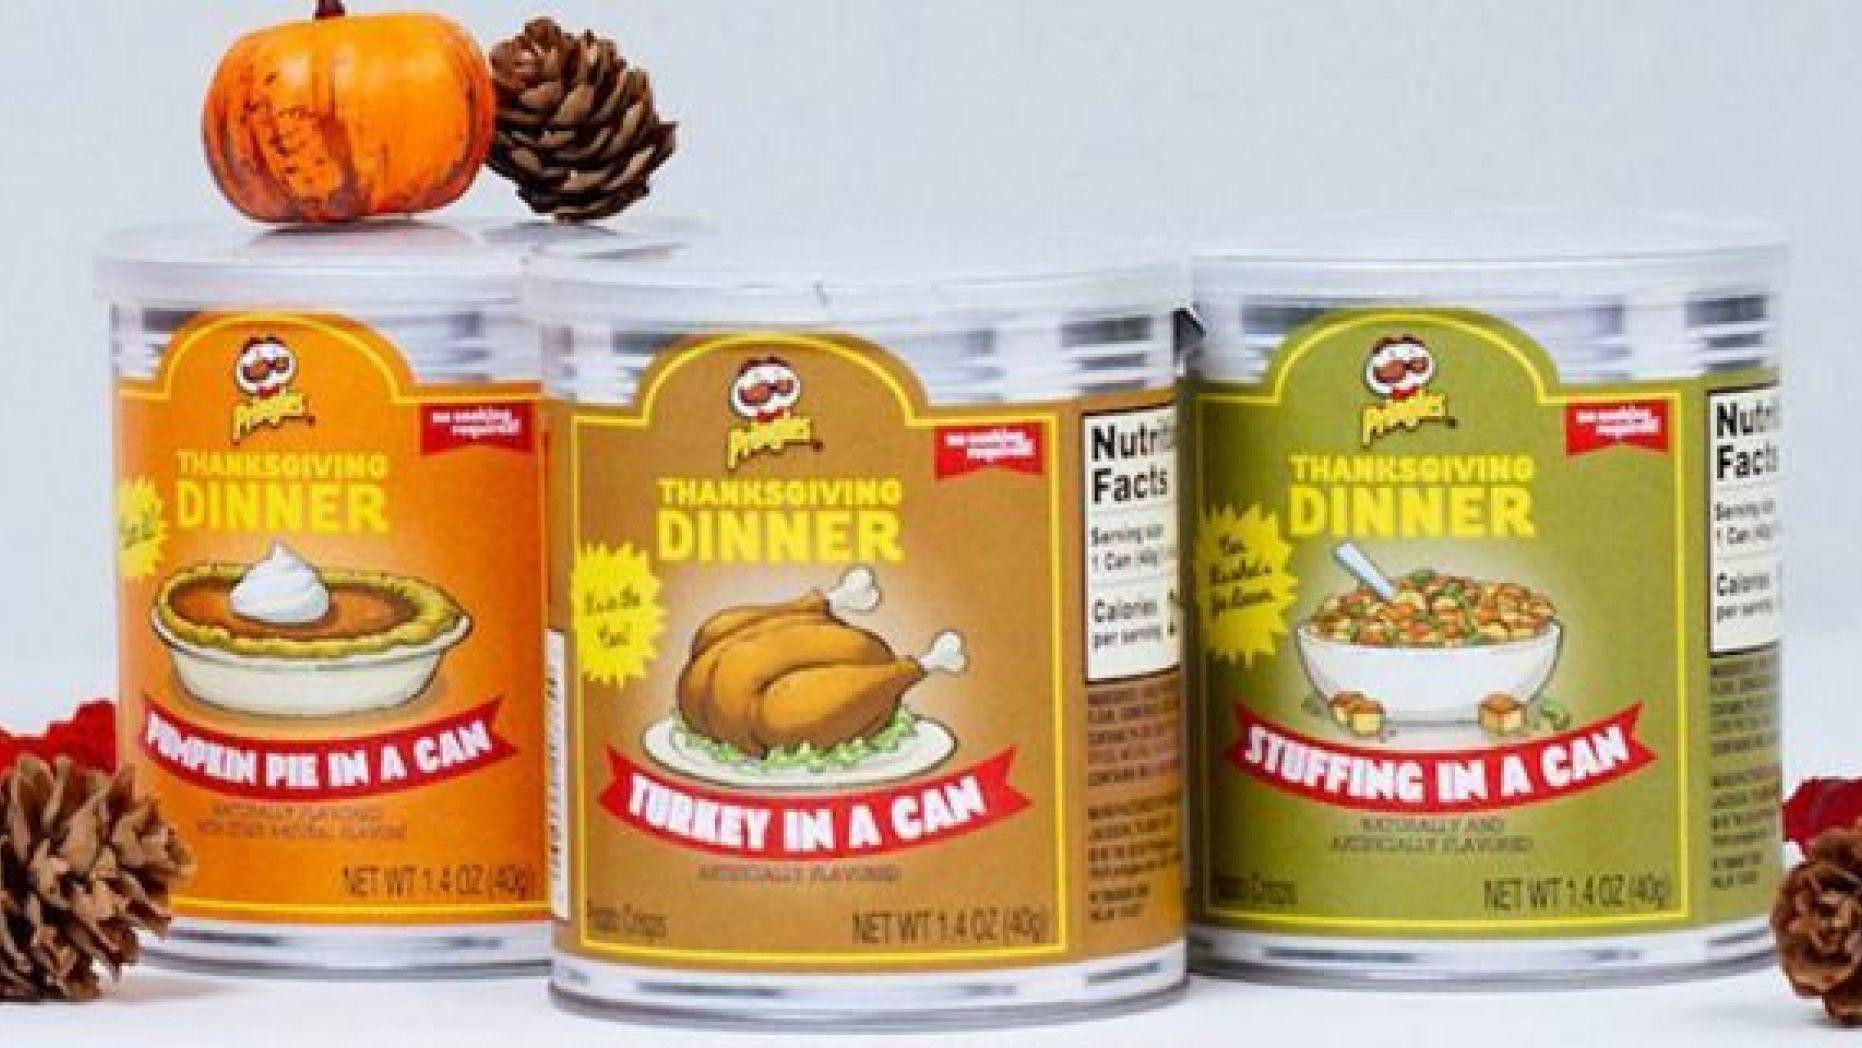 Thanksgiving Dinner Pringles
 You Could Have A Pringles Thanksgiving Dinner This Year